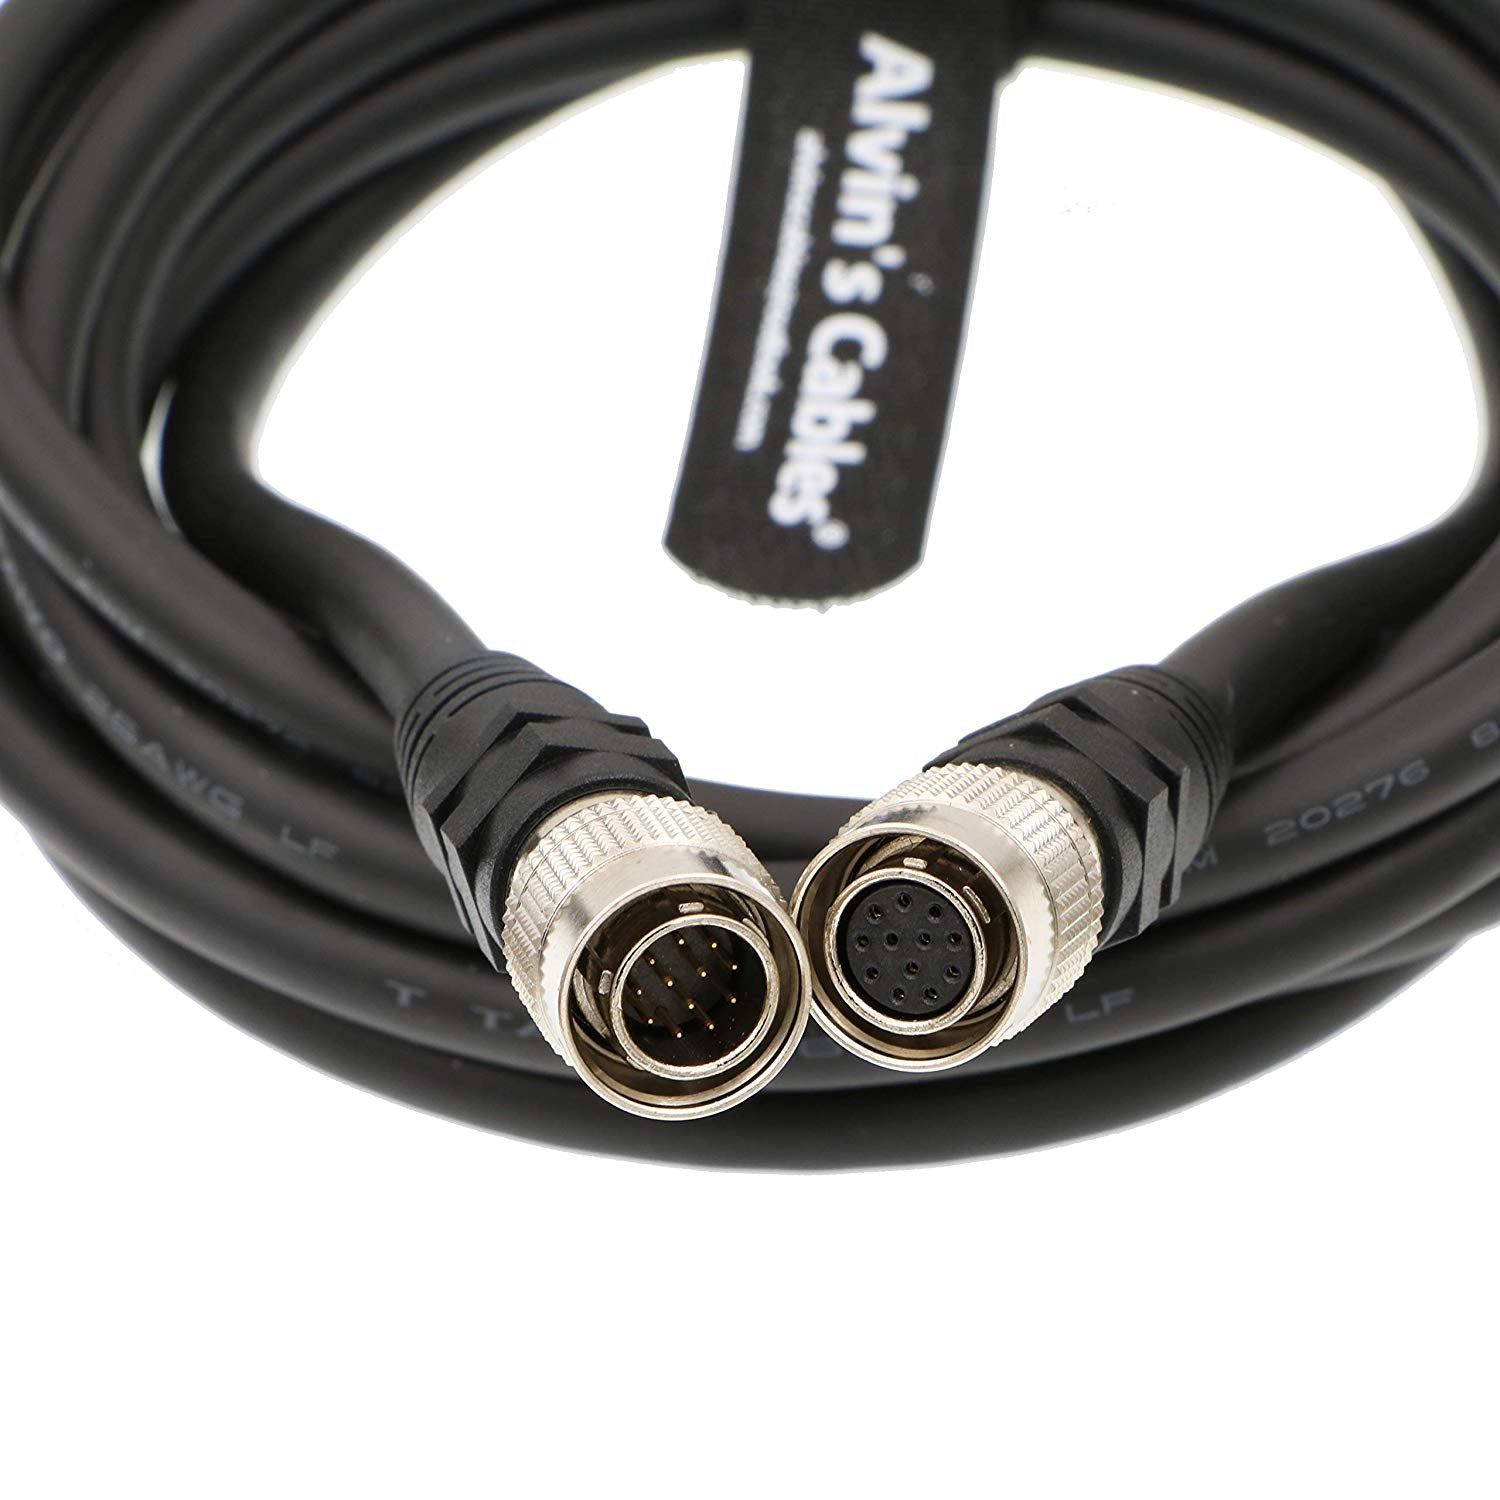 Alvin's Cables Coaxial 12 Pin Hirose Male to 12 Pin Hirose Female Cable for Sony Camera Computer Network